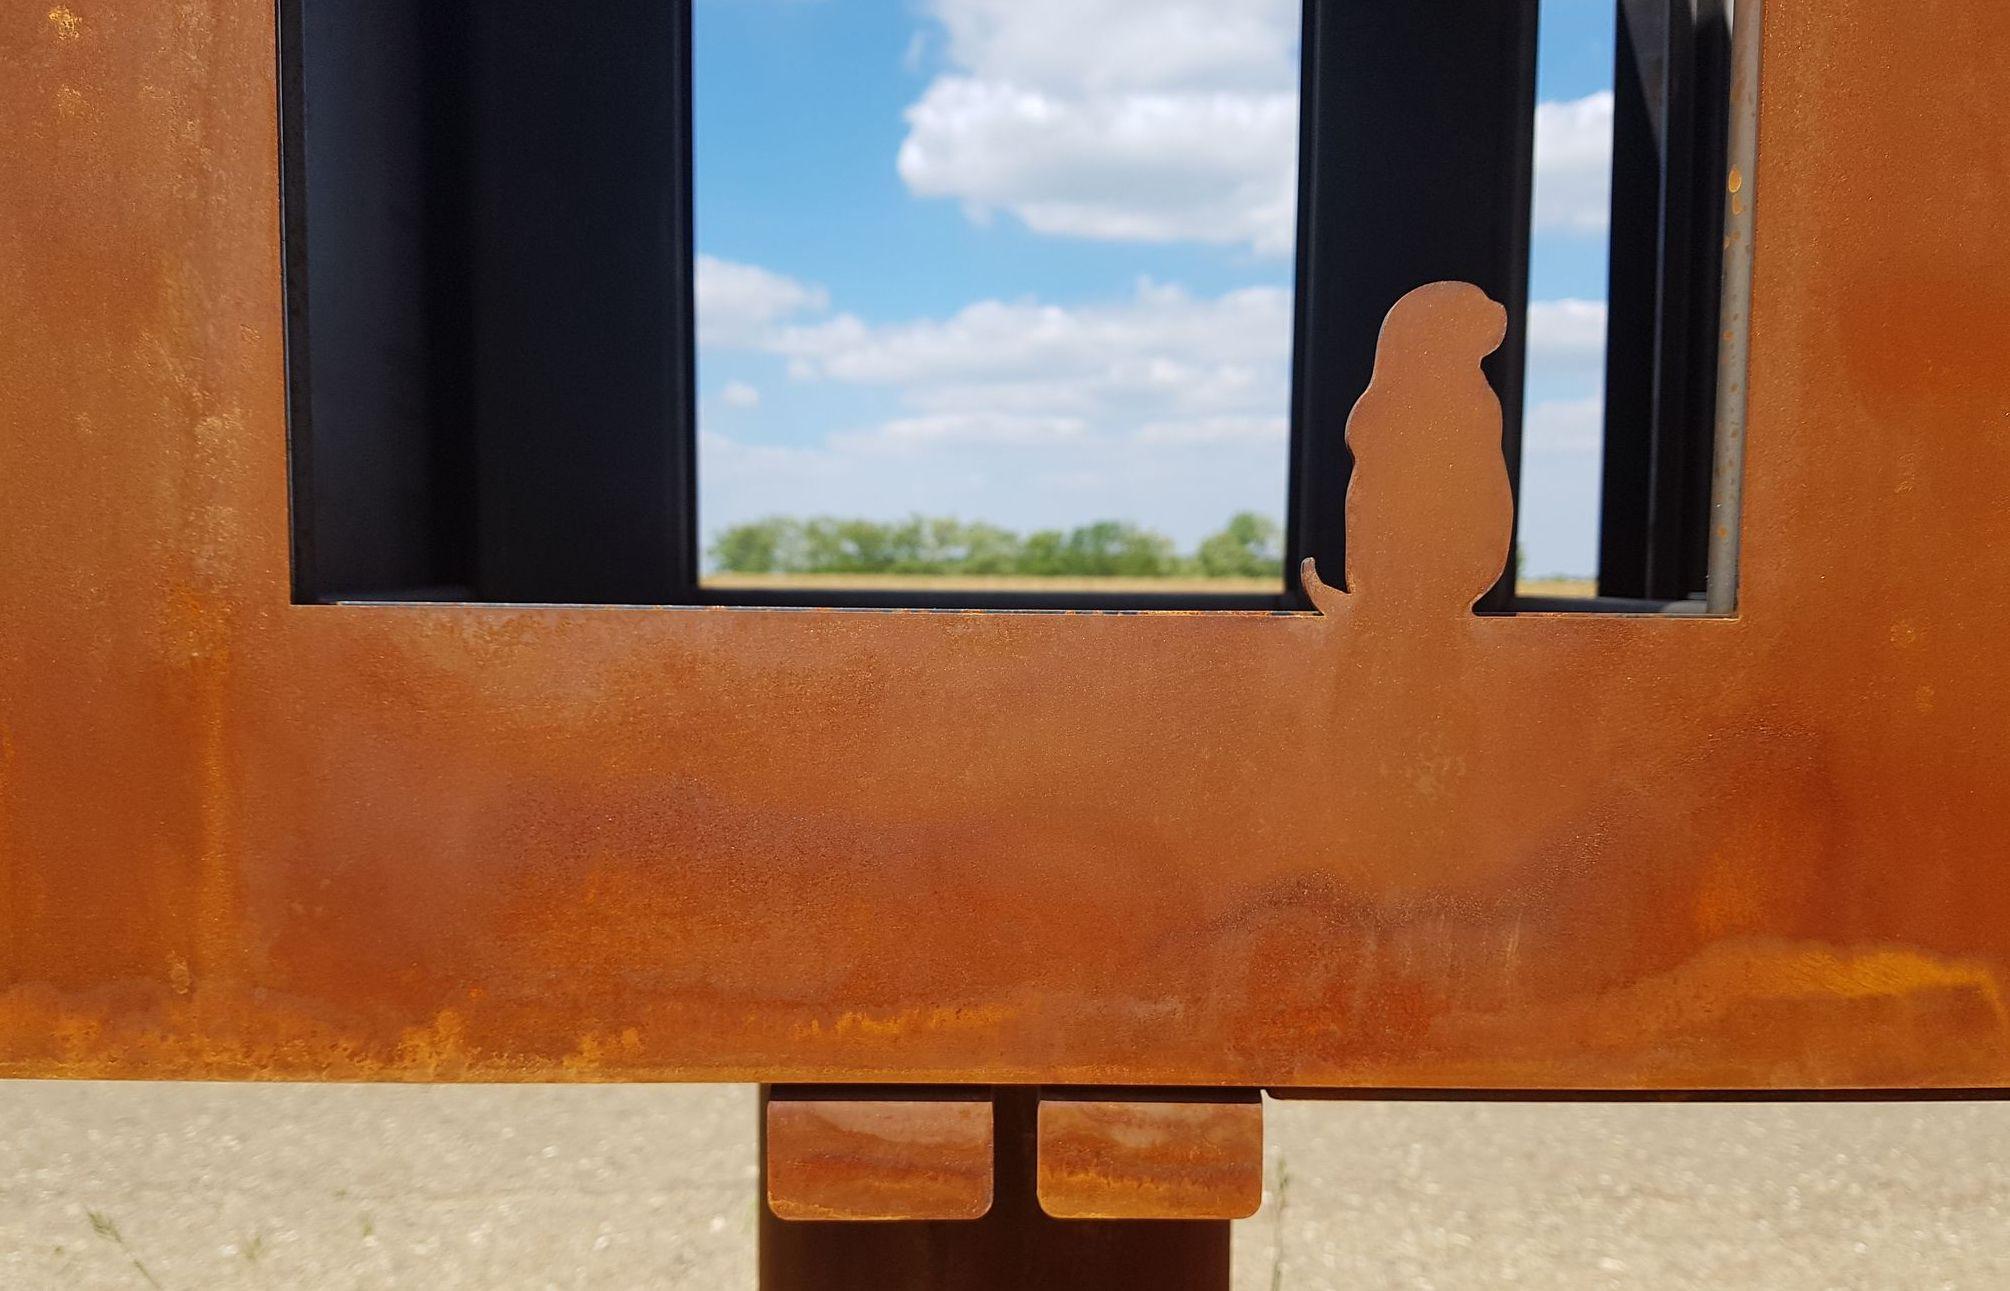 Woodchuck S - Operation of garden stove in weathering steel